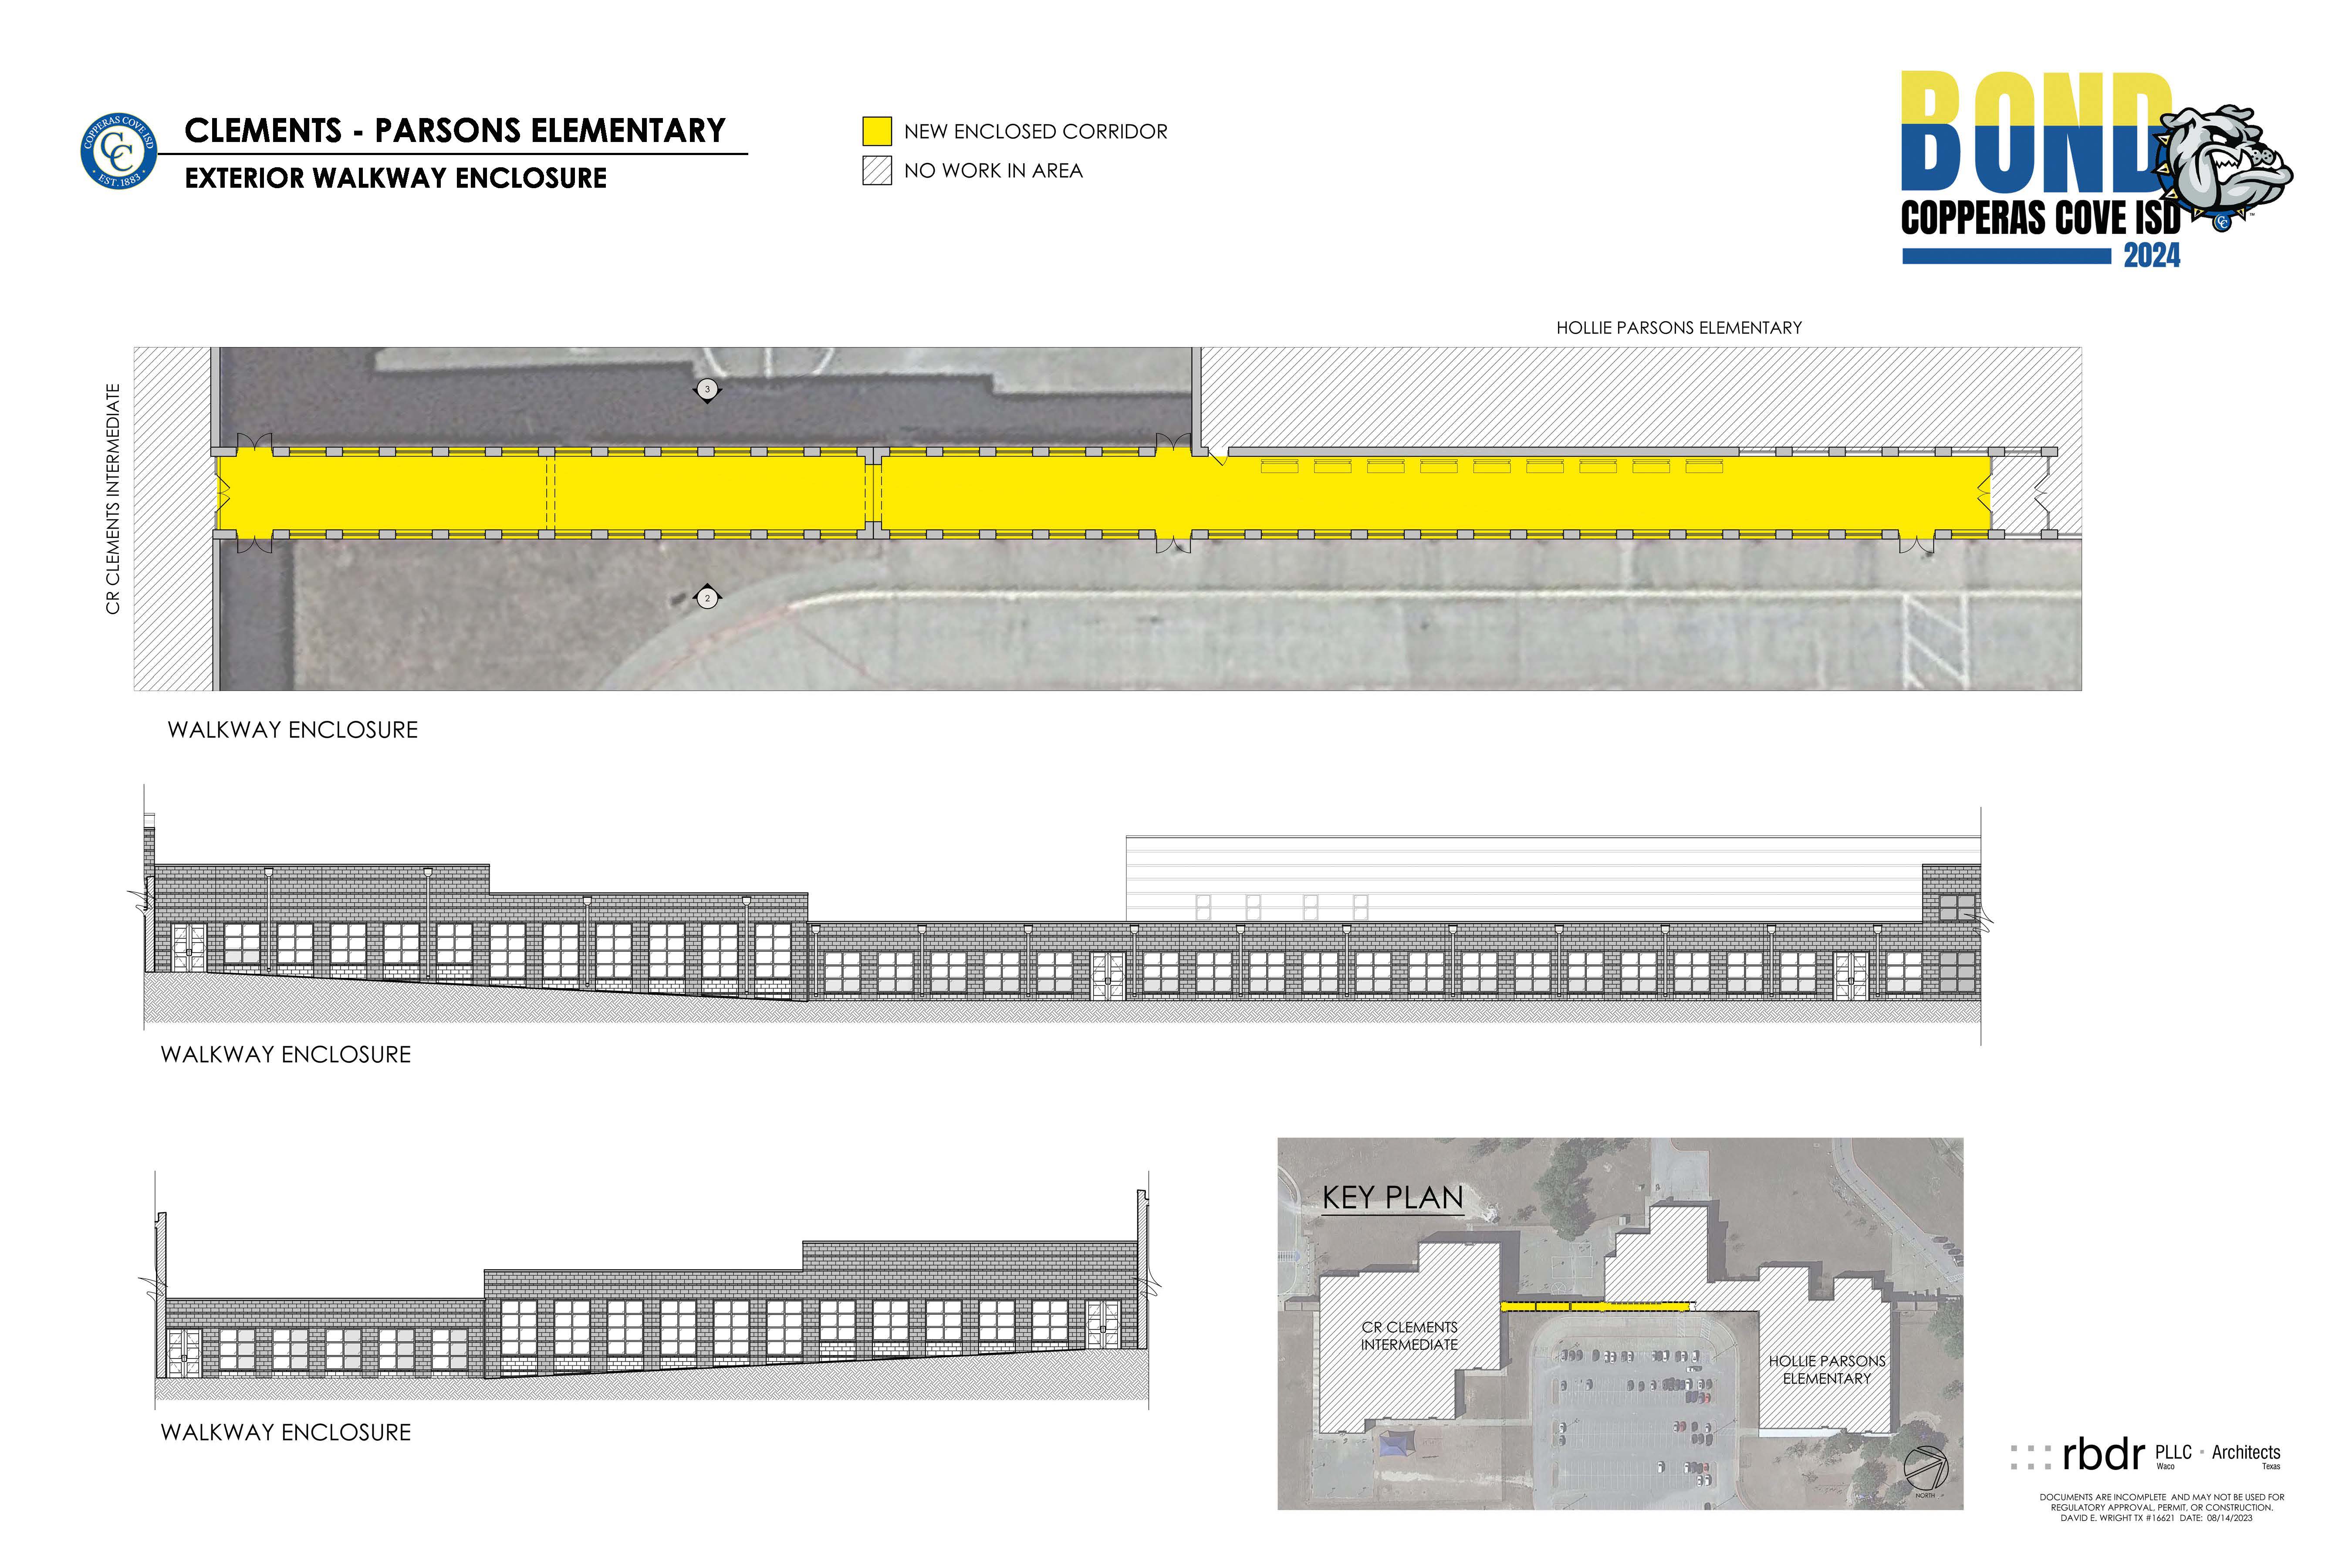 Architectural drawing of proposed walkway enclosure at Clements Parsons Elementary